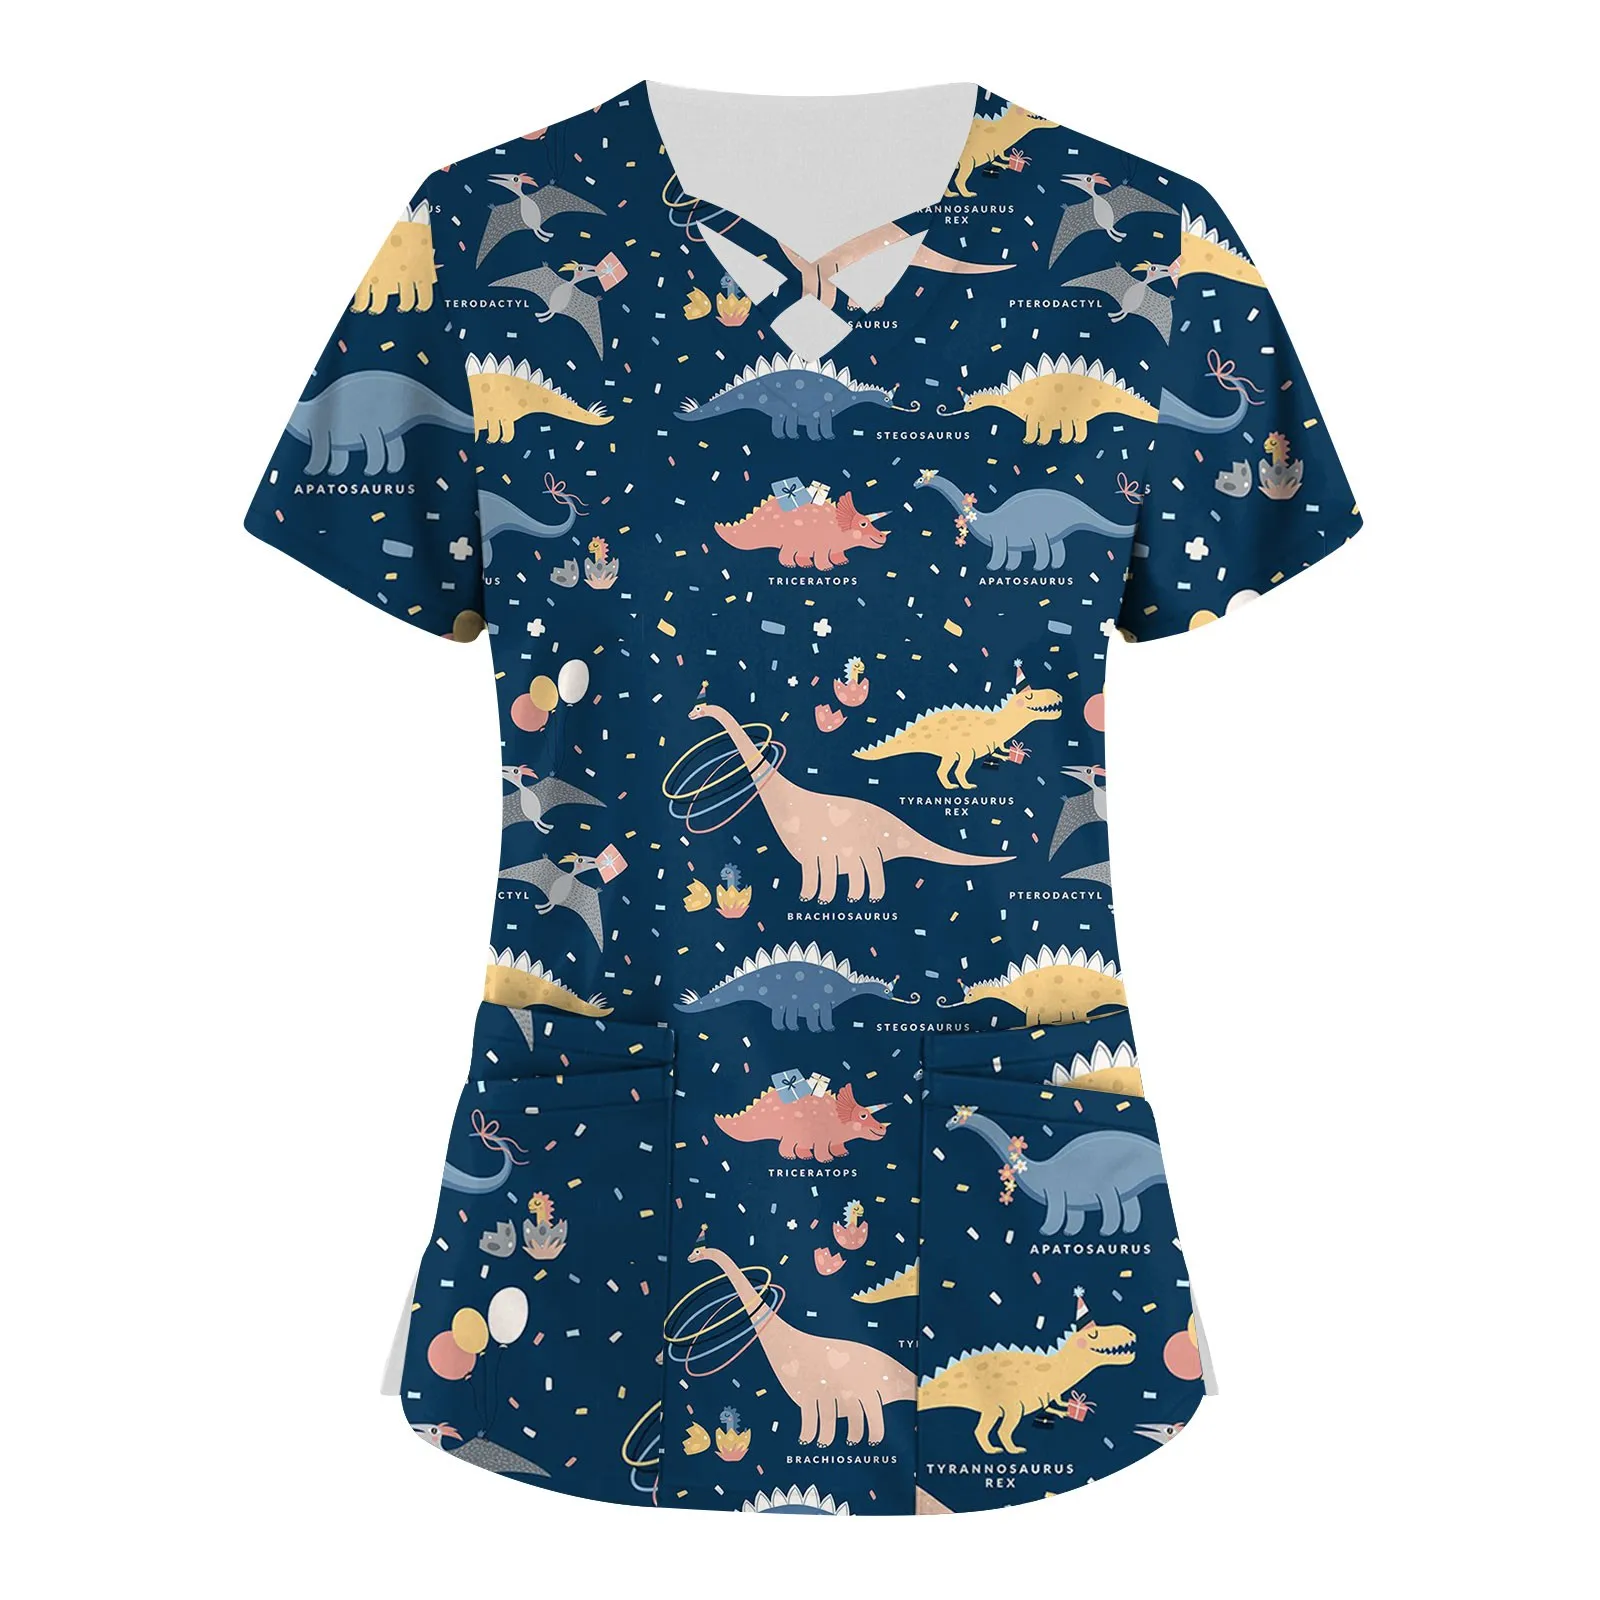 Armored Pterodactyl Women's Plus Size T-Shirt